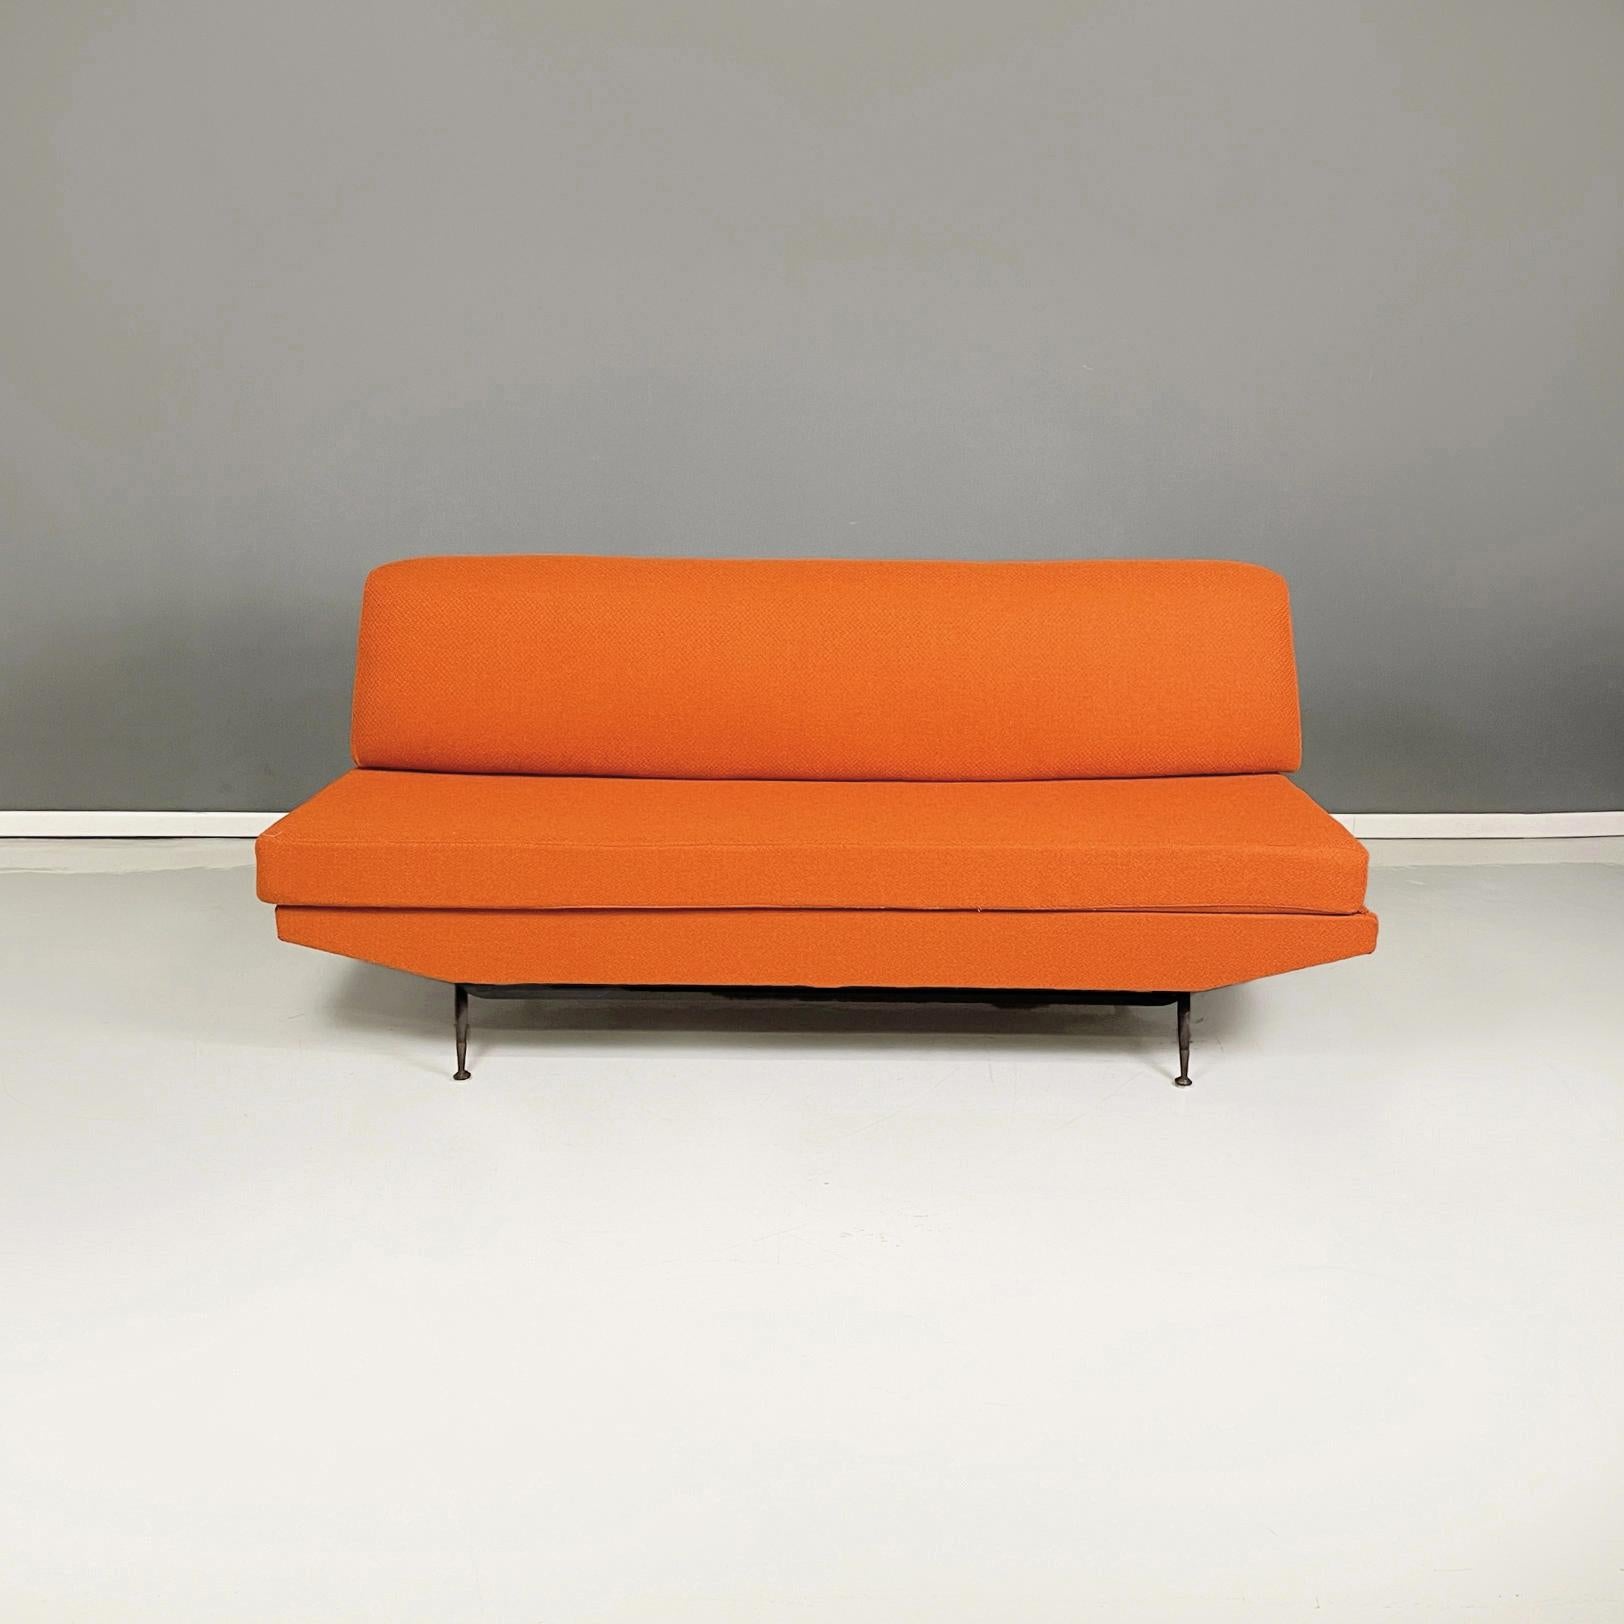 Italian Mid-Century Modern sofa and bed in orange fabric and black metal, 1960s
Sofa bed mod. Relax with padded rectangular seat and back covered in bright orange fabric. The seat can be pulled out, thus becoming a bed. Furthermore, the external